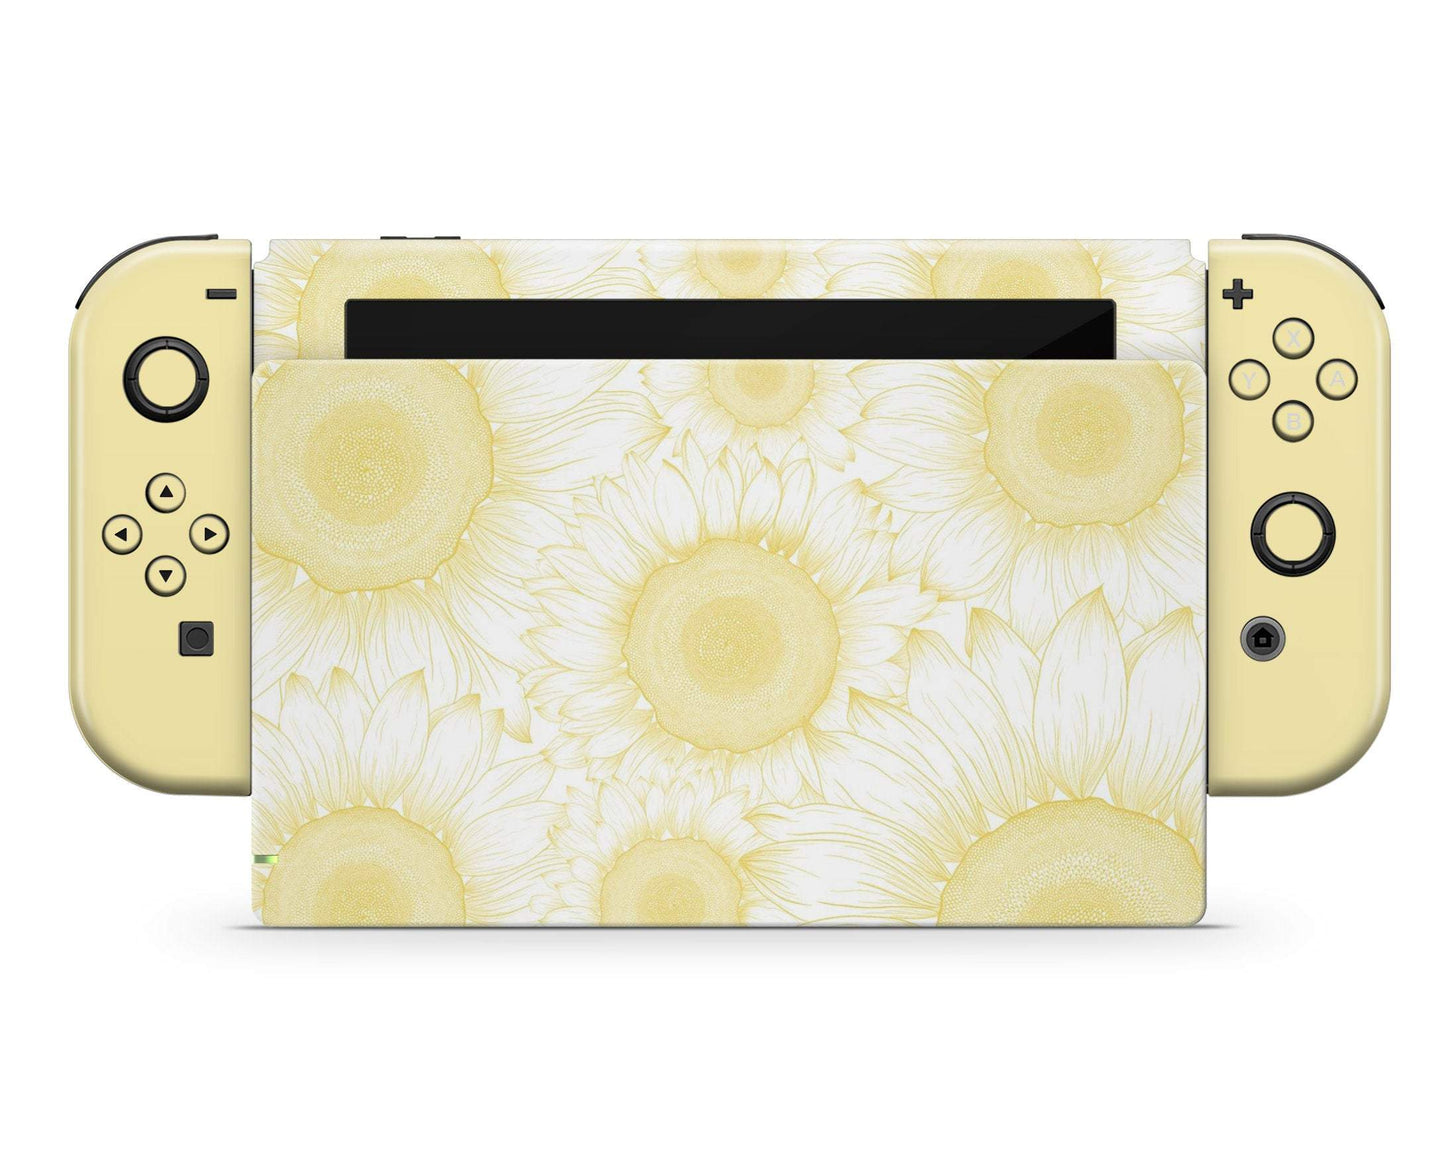 Lux Skins Nintendo Switch Pale Yellow Sunflower Full Set Skins - Art Floral Skin